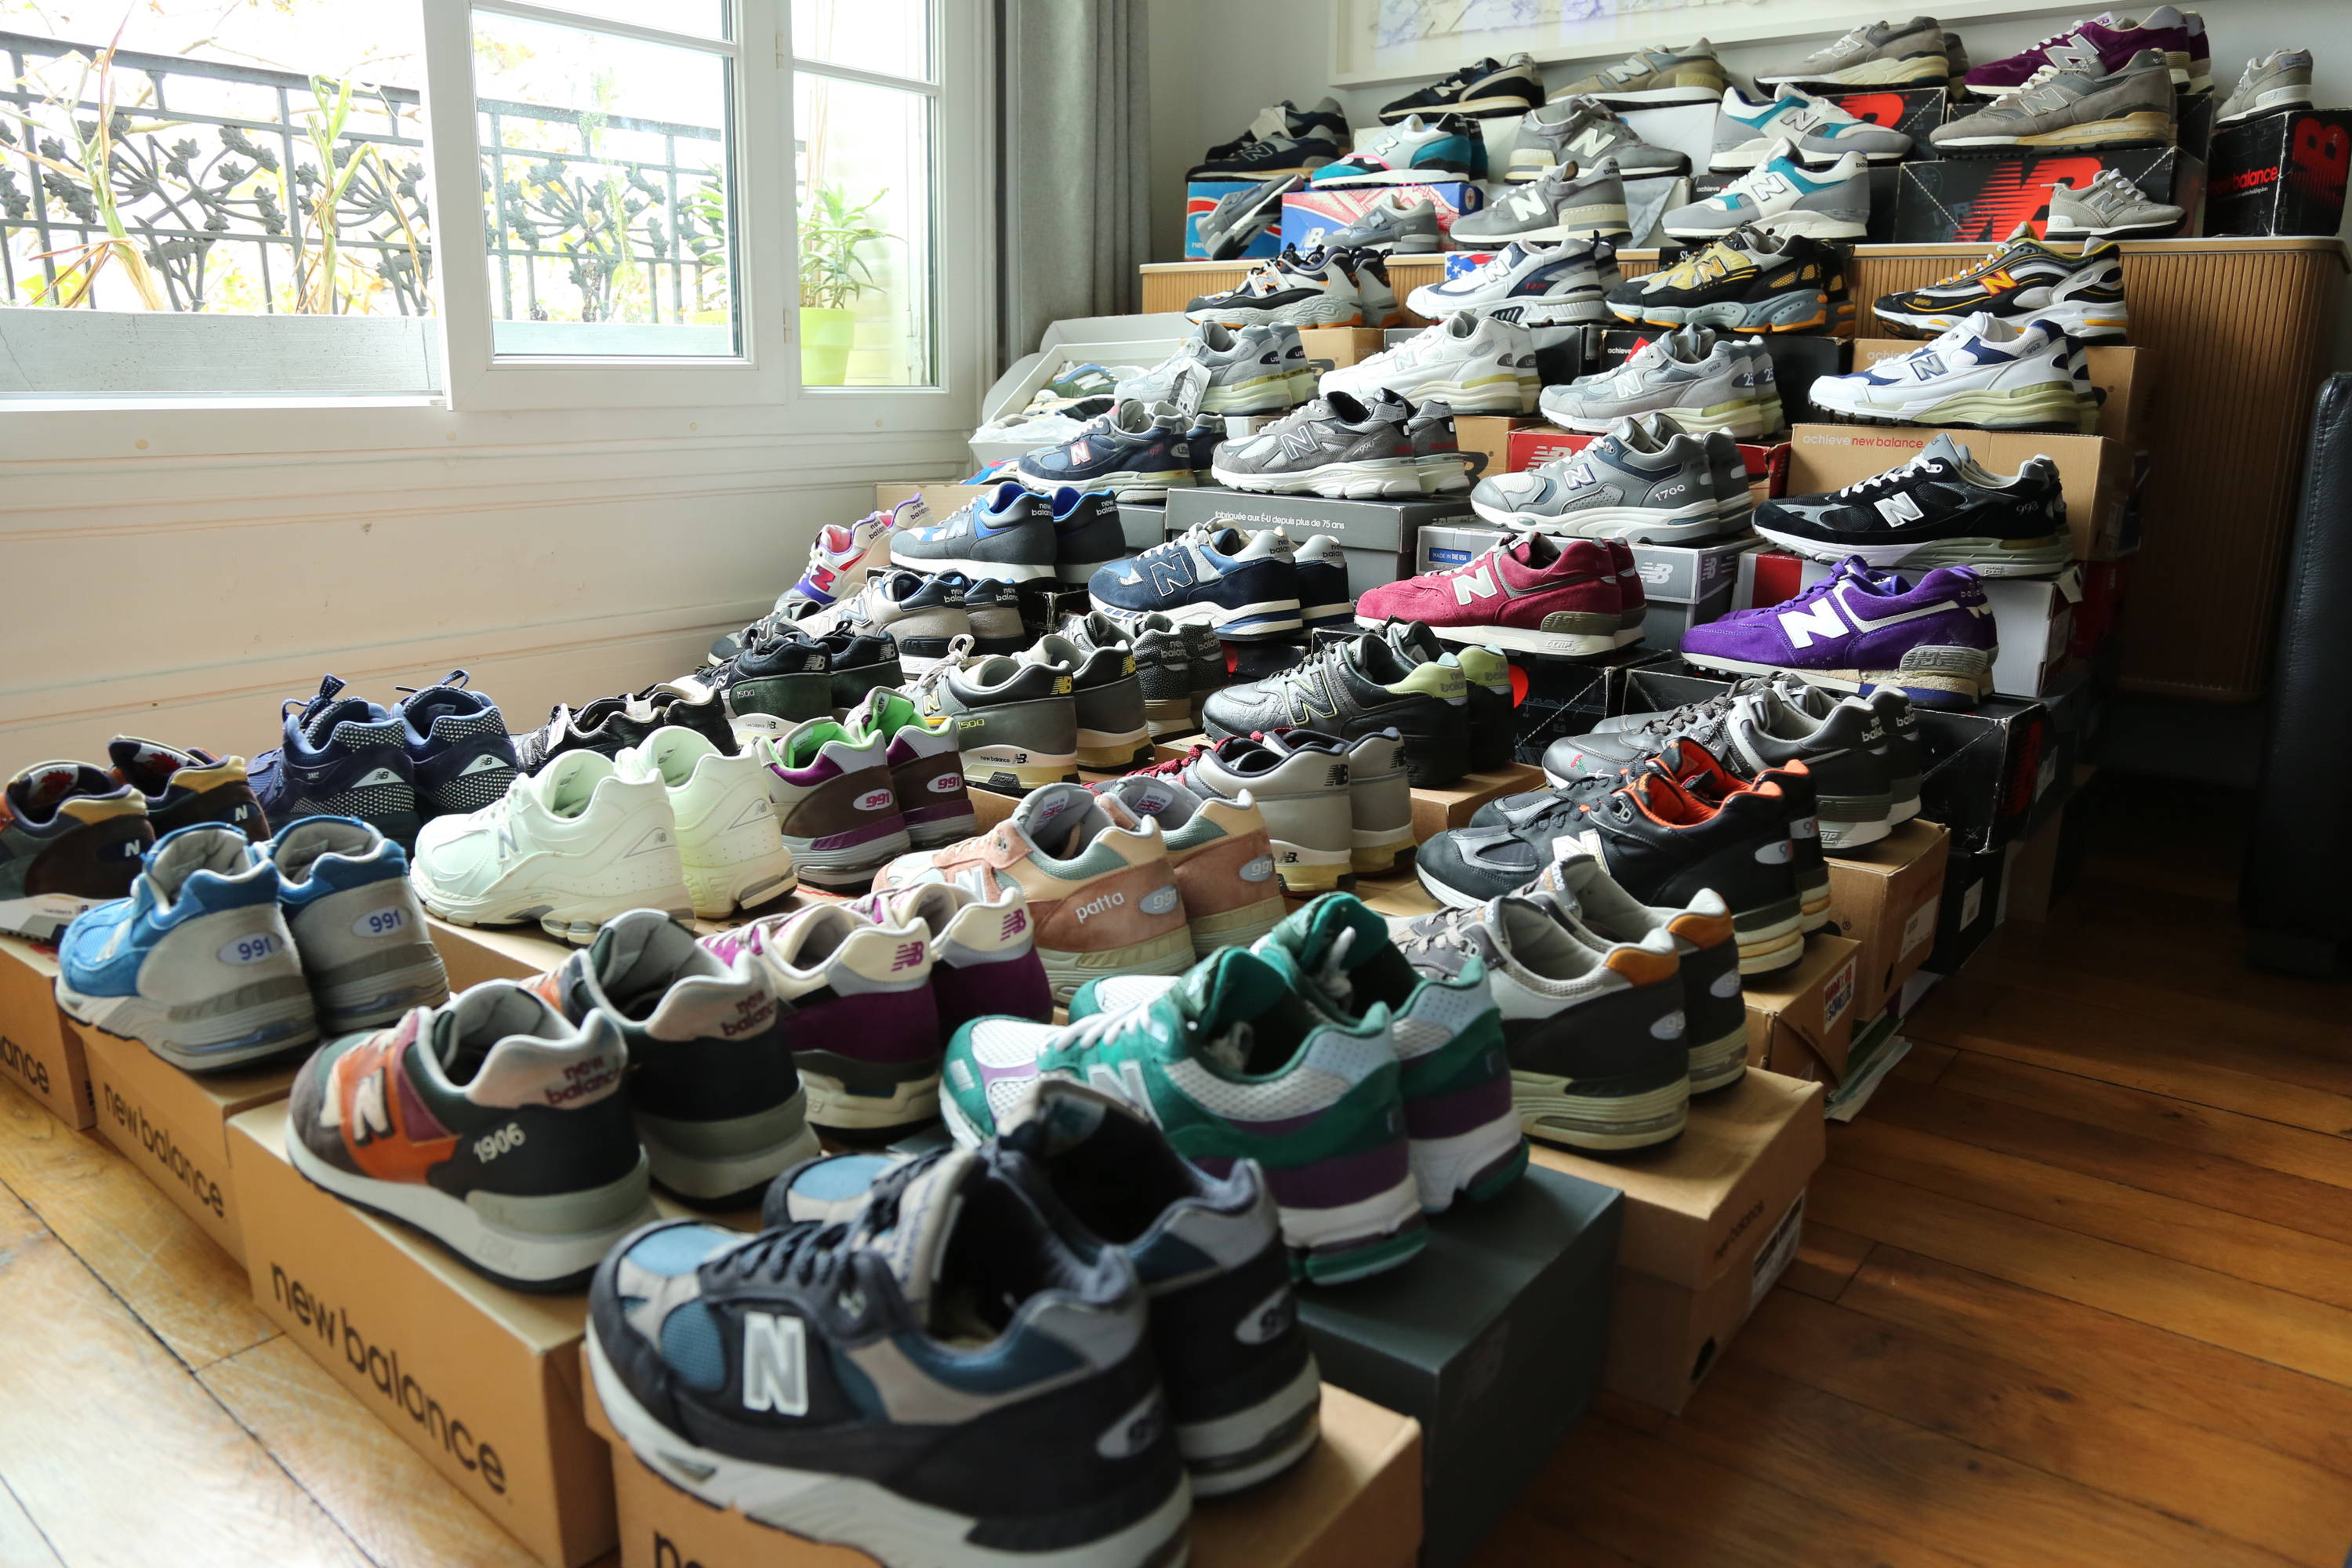 Thomas Dartiques' collection of new balance